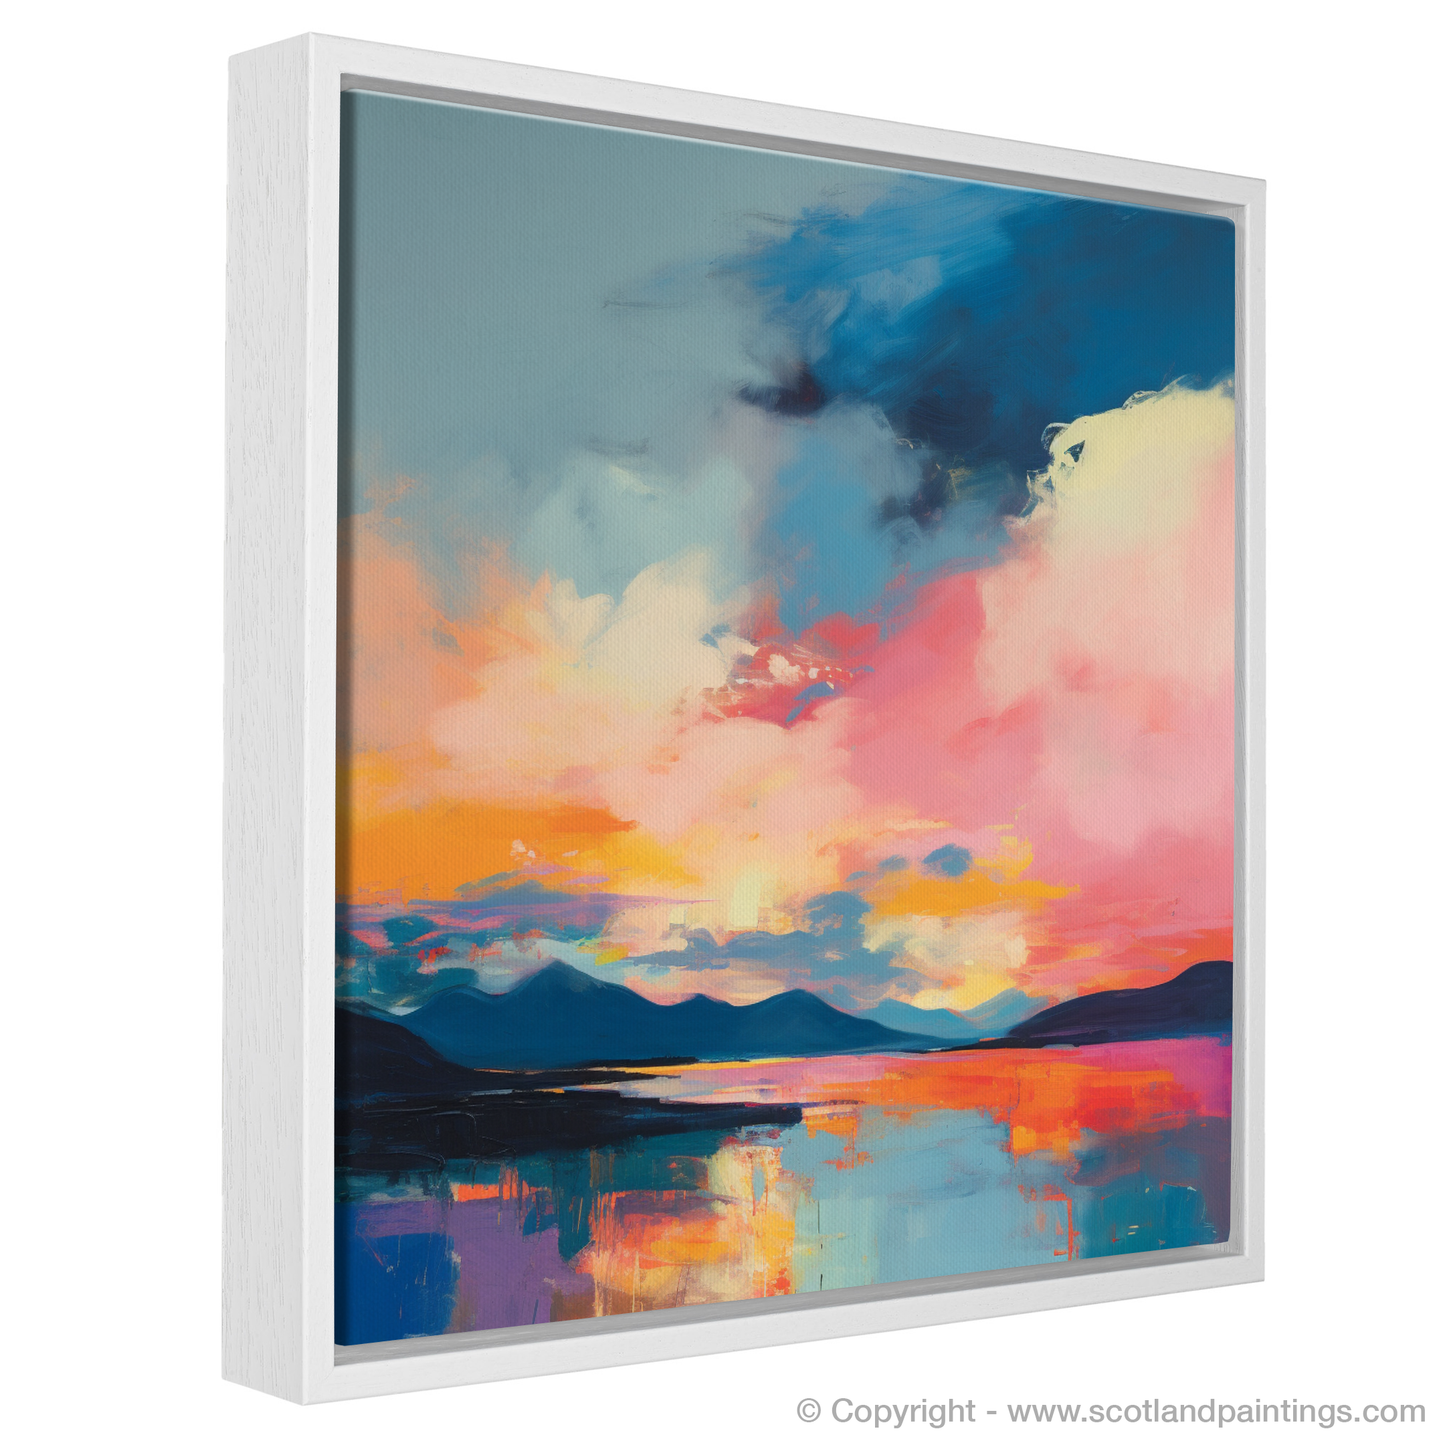 Painting and Art Print of A huge sky above Loch Lomond entitled "Twilight Reverie over Loch Lomond".